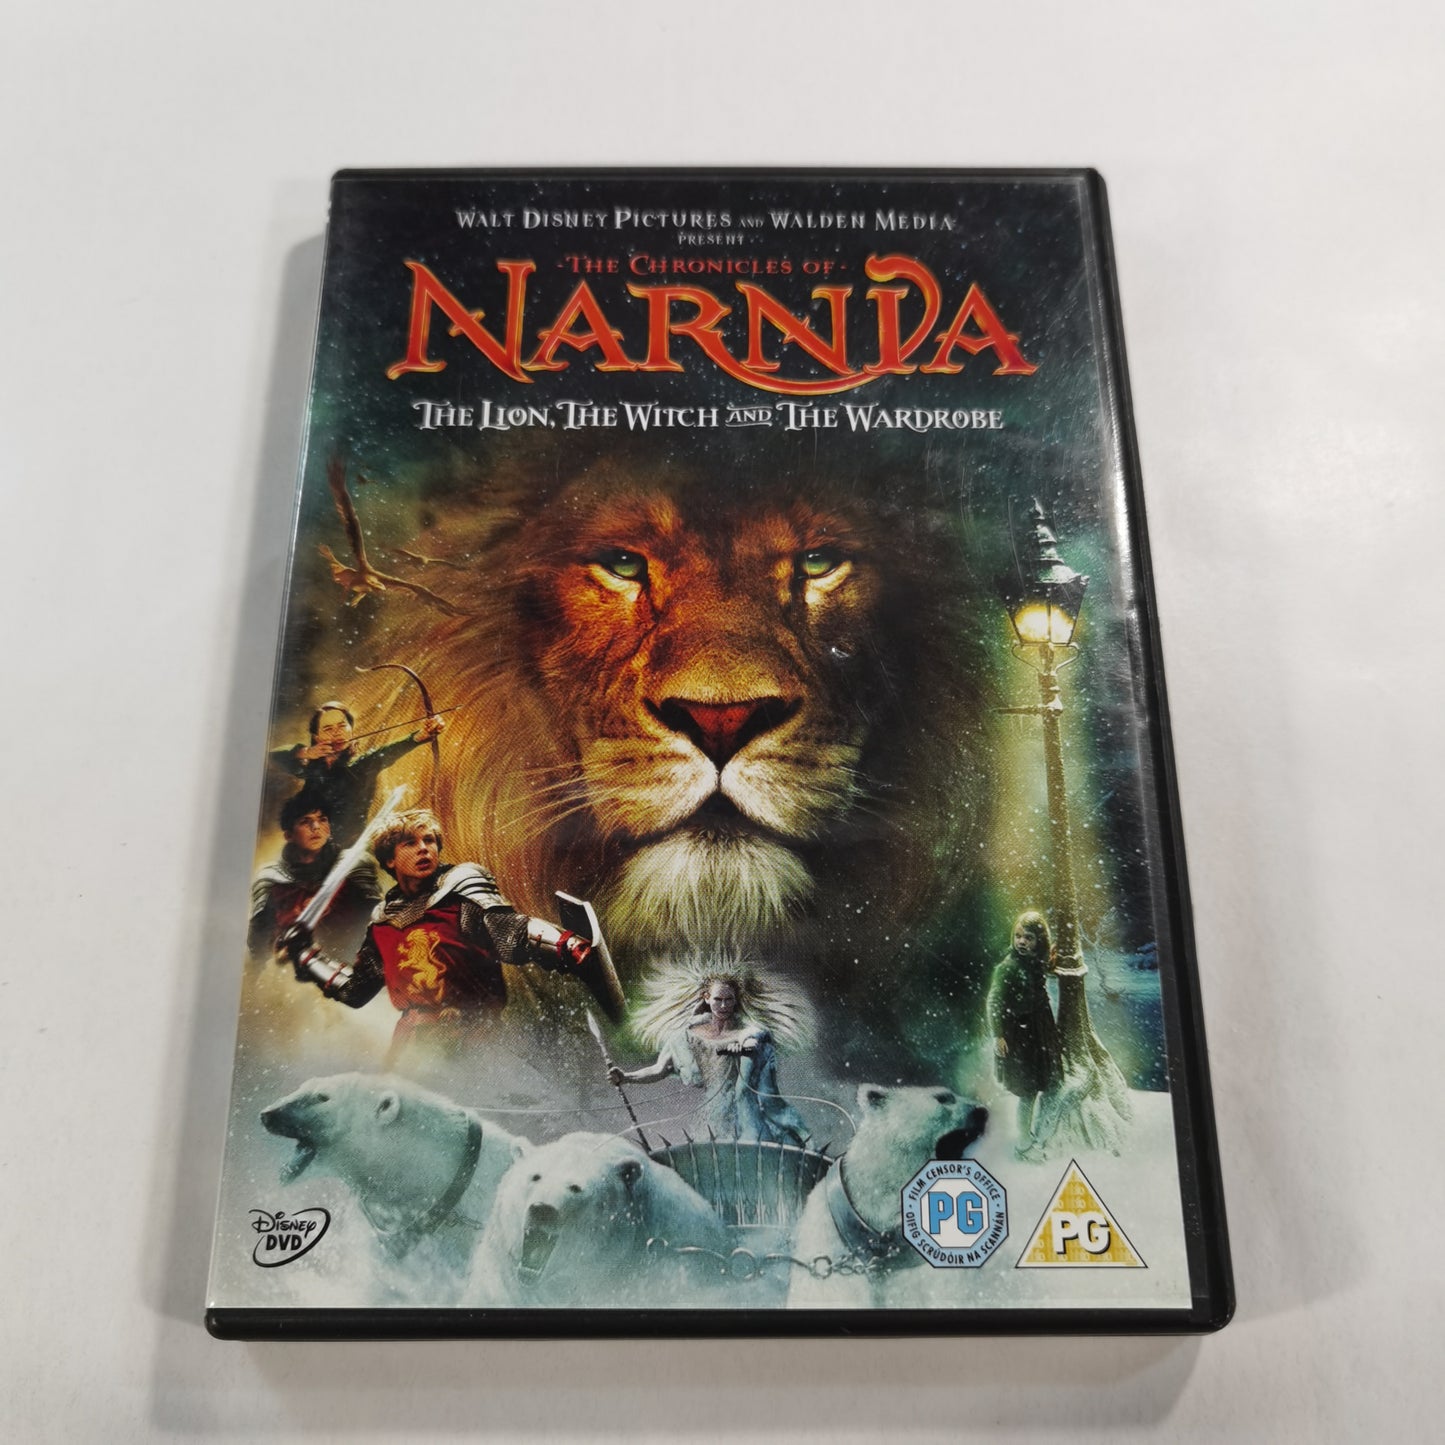 The Chronicles of Narnia: The Lion, the Witch and the Wardrobe (2005) - DVD UK Z1.2B